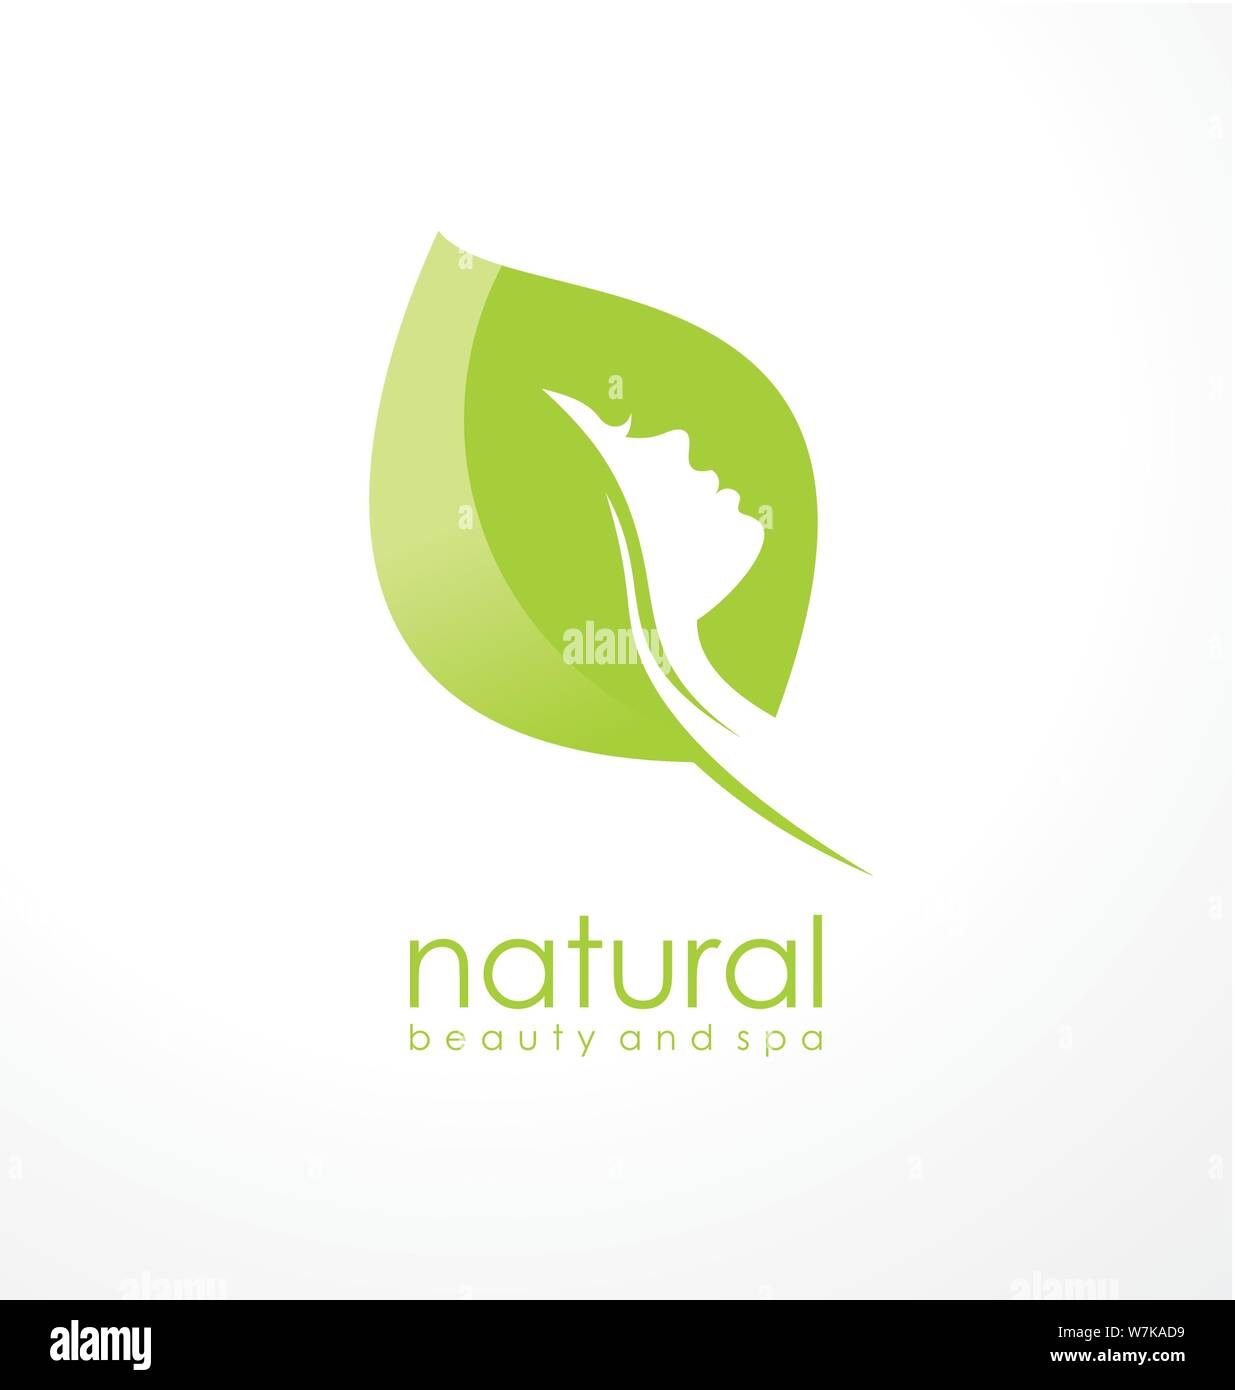 Natural Beauty Logo Design Idea With Green Leaf Shape And Girl Silhouette In Negative Space Beauty Spa And Fashion Symbol Vector Icon Stock Vector Image Art Alamy